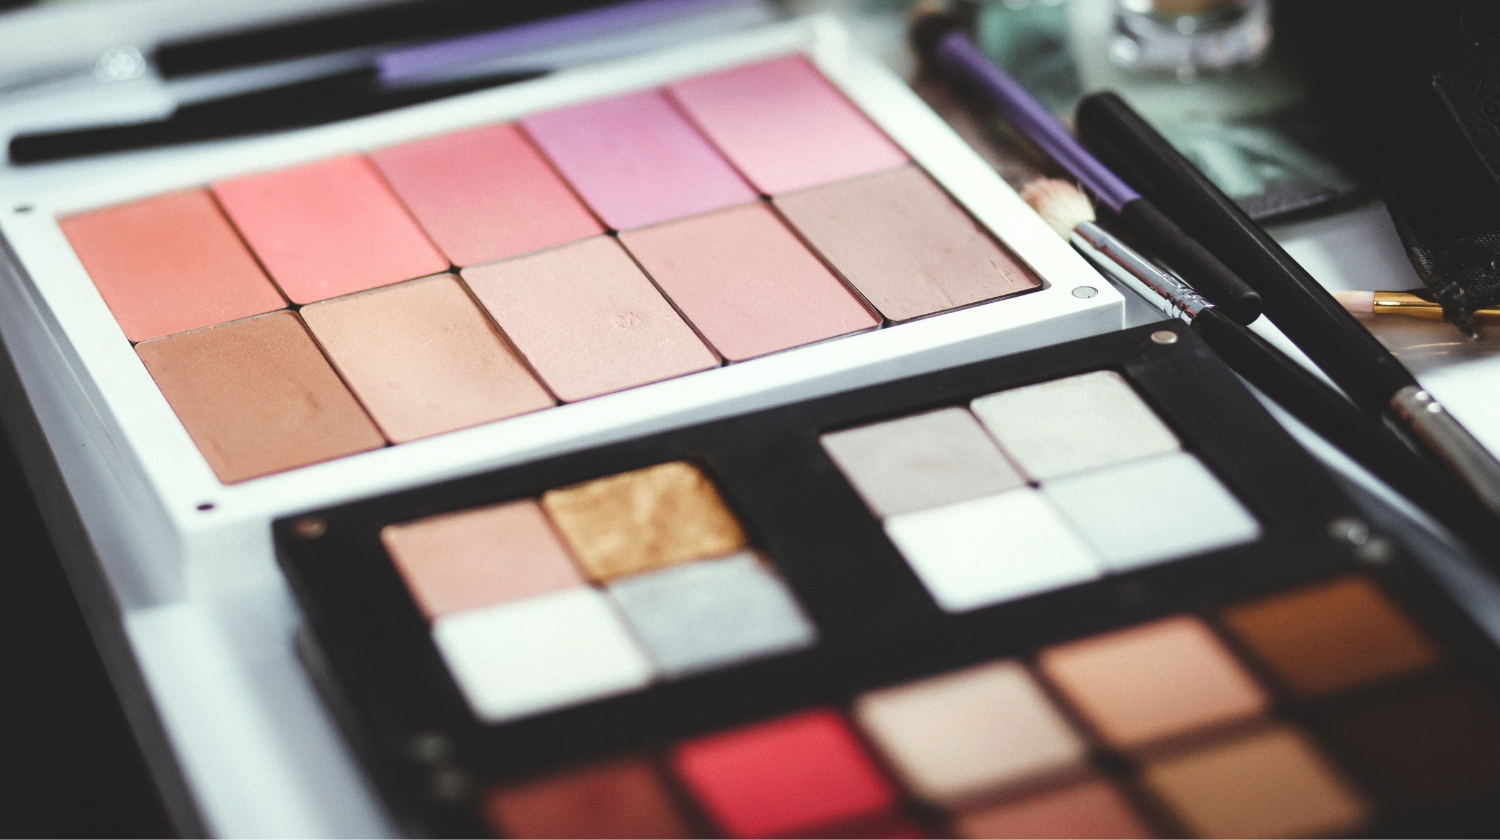 feature | Cruelty-Free Makeup Brands You Can Trust That Are Top Shelf Quality